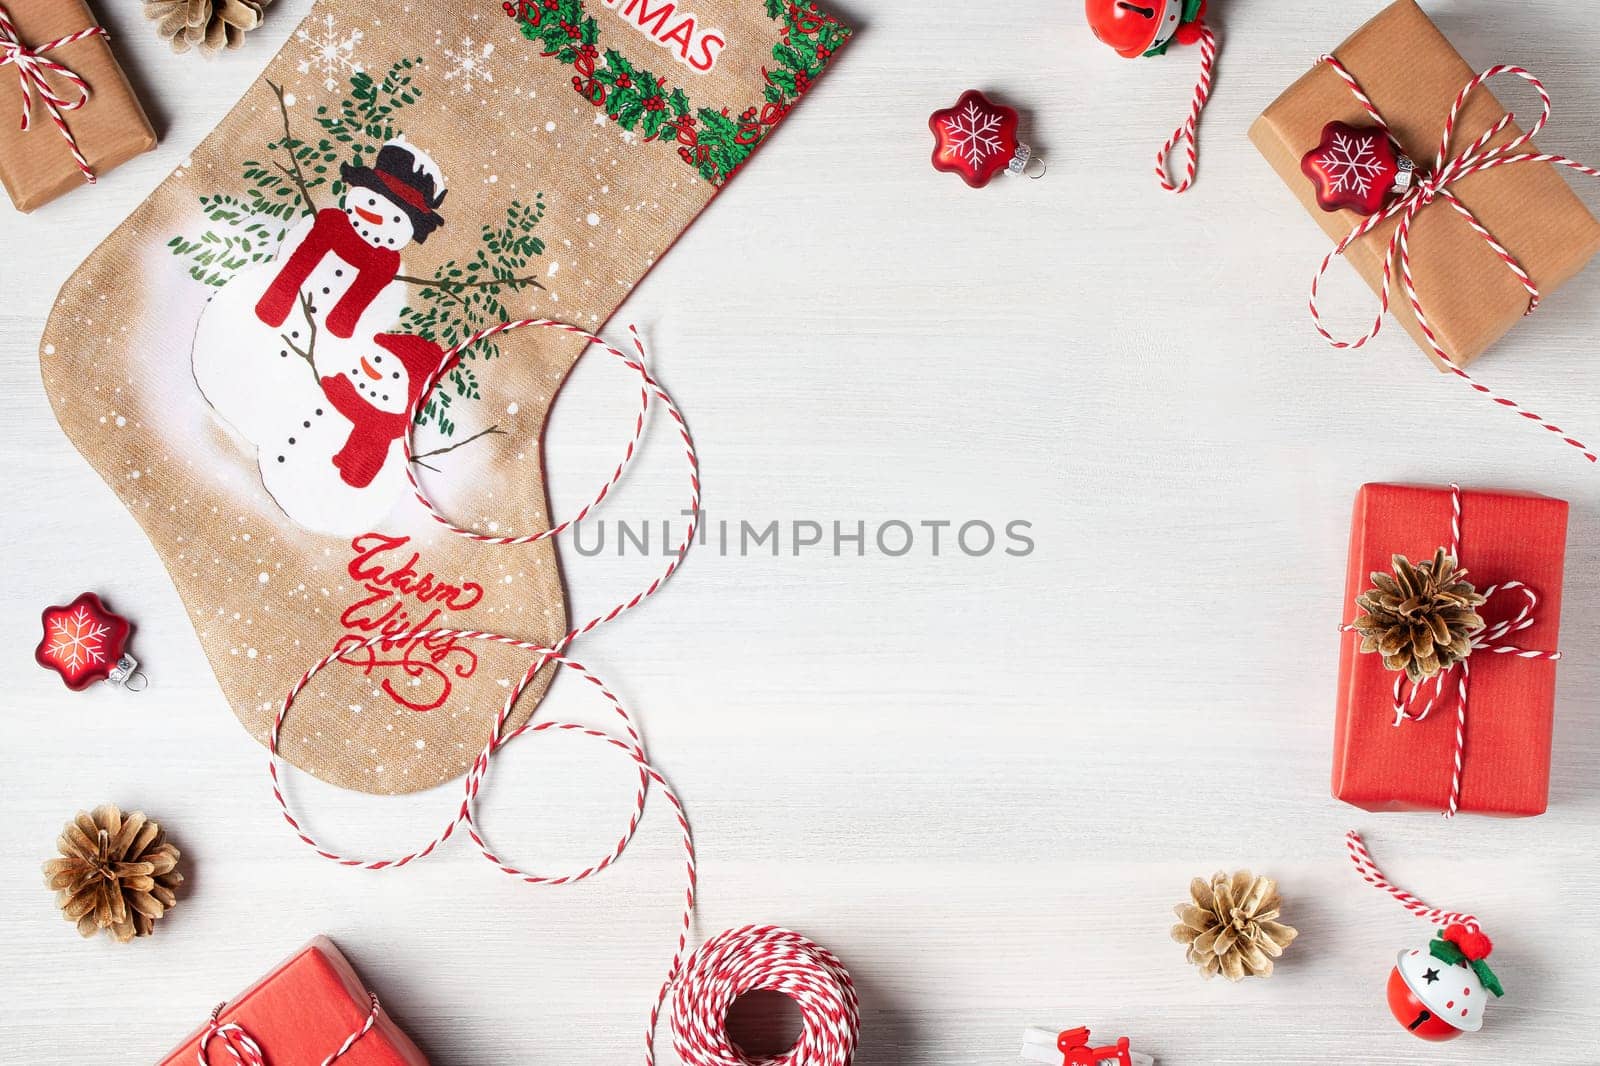 Preparing for Christmas - presents and decorations on a white wooden table. Mockup for advertisements and Christmas cards by galsand